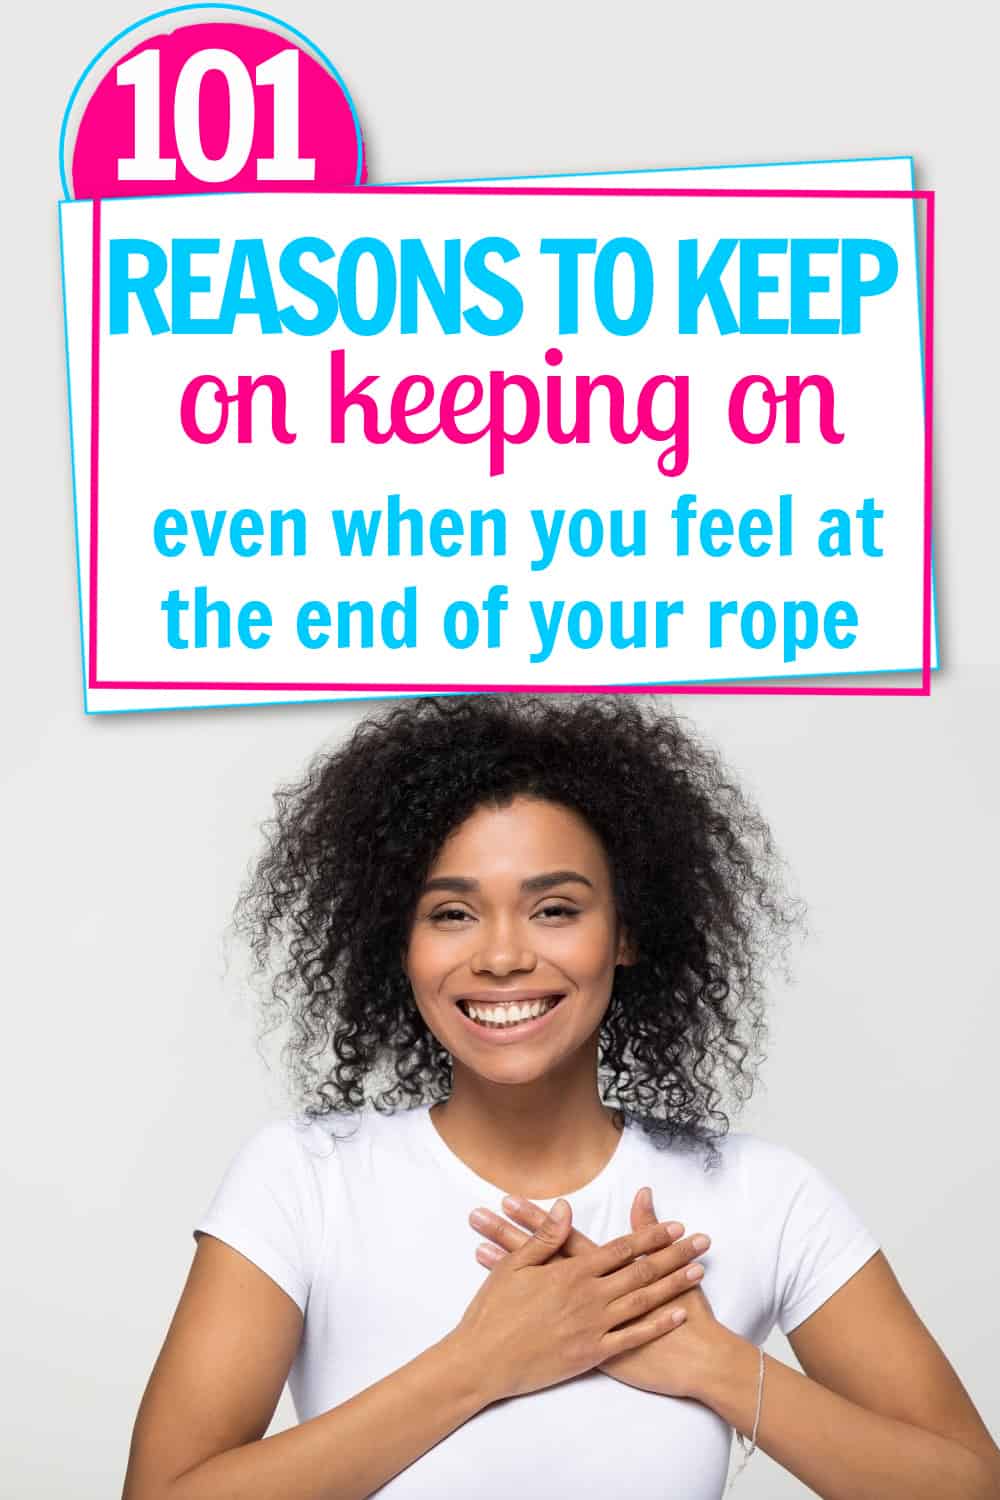 Female holding hands over heart and smiling. Title text says 101 reasons to keep on keeping on even when you feel at the end of your rope